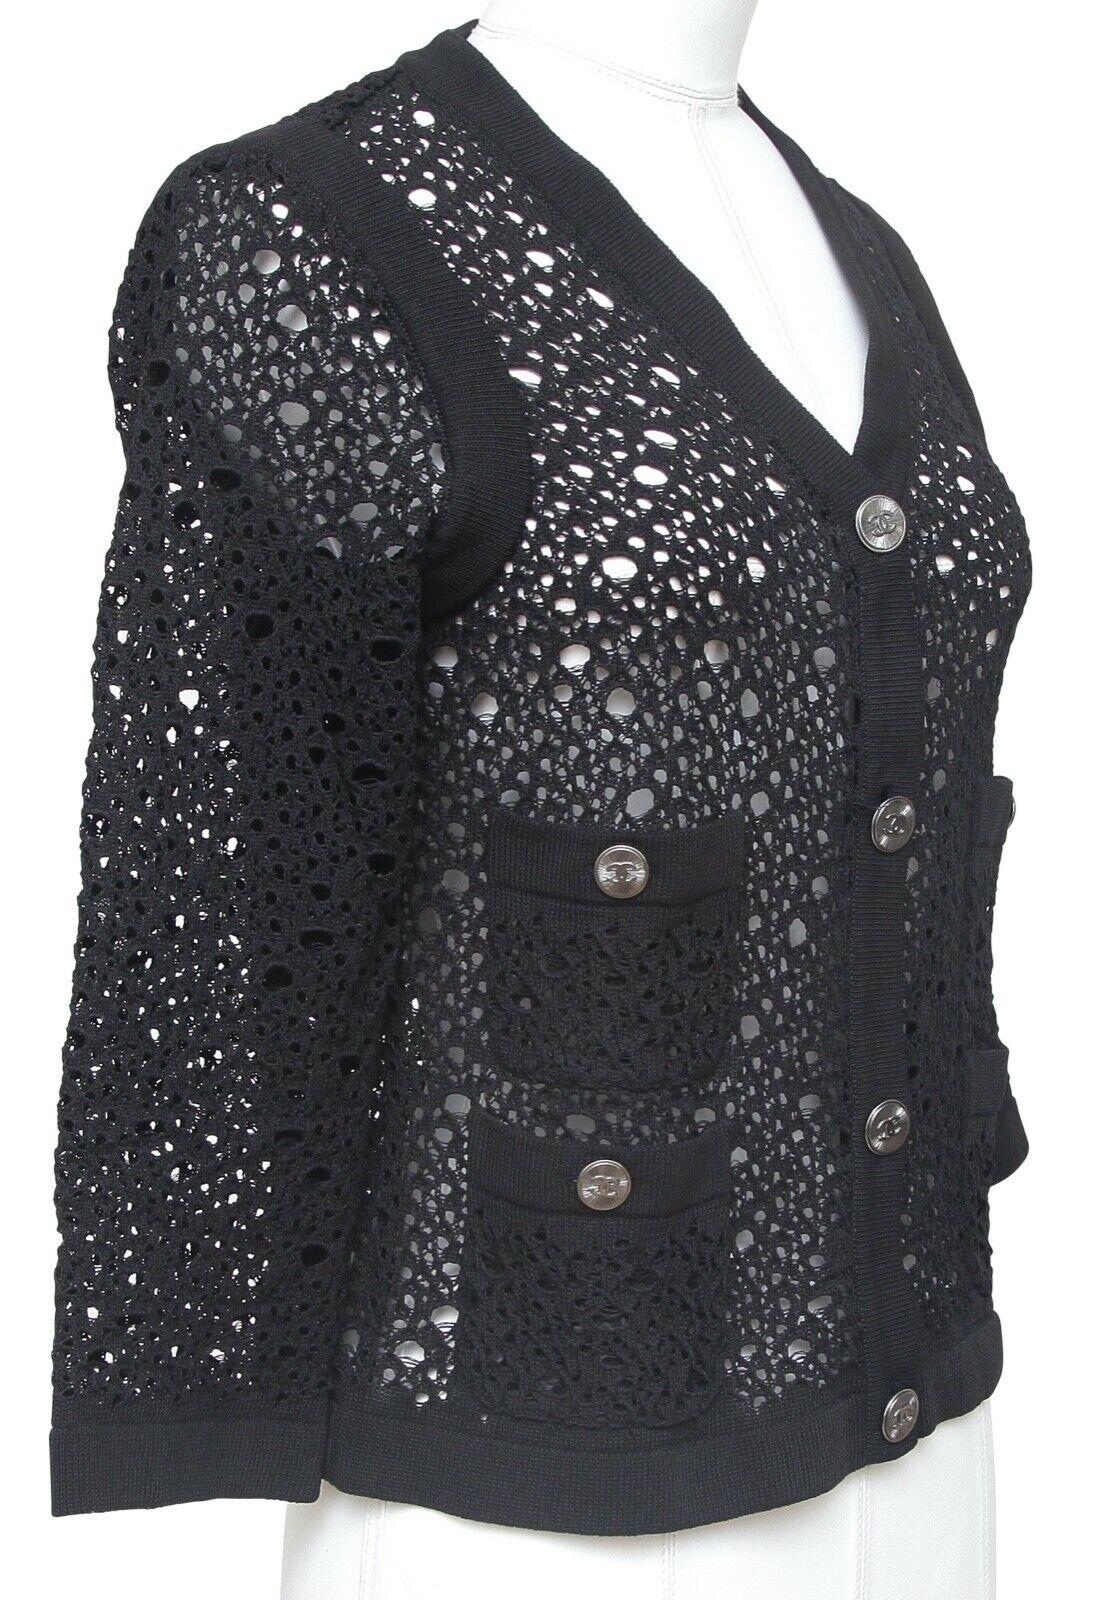 GUARANTEED AUTHENTIC CHANEL SPRING SUMMER 2012 BLACK V-NECK CARDIGAN


Details:
- Versatile black cotton blend open knit cardigan.
- V-neck.
- Double dual front pockets.
- Gunmetal CC buttons down front and at front pockets.
- 3/4 sleeves.
-